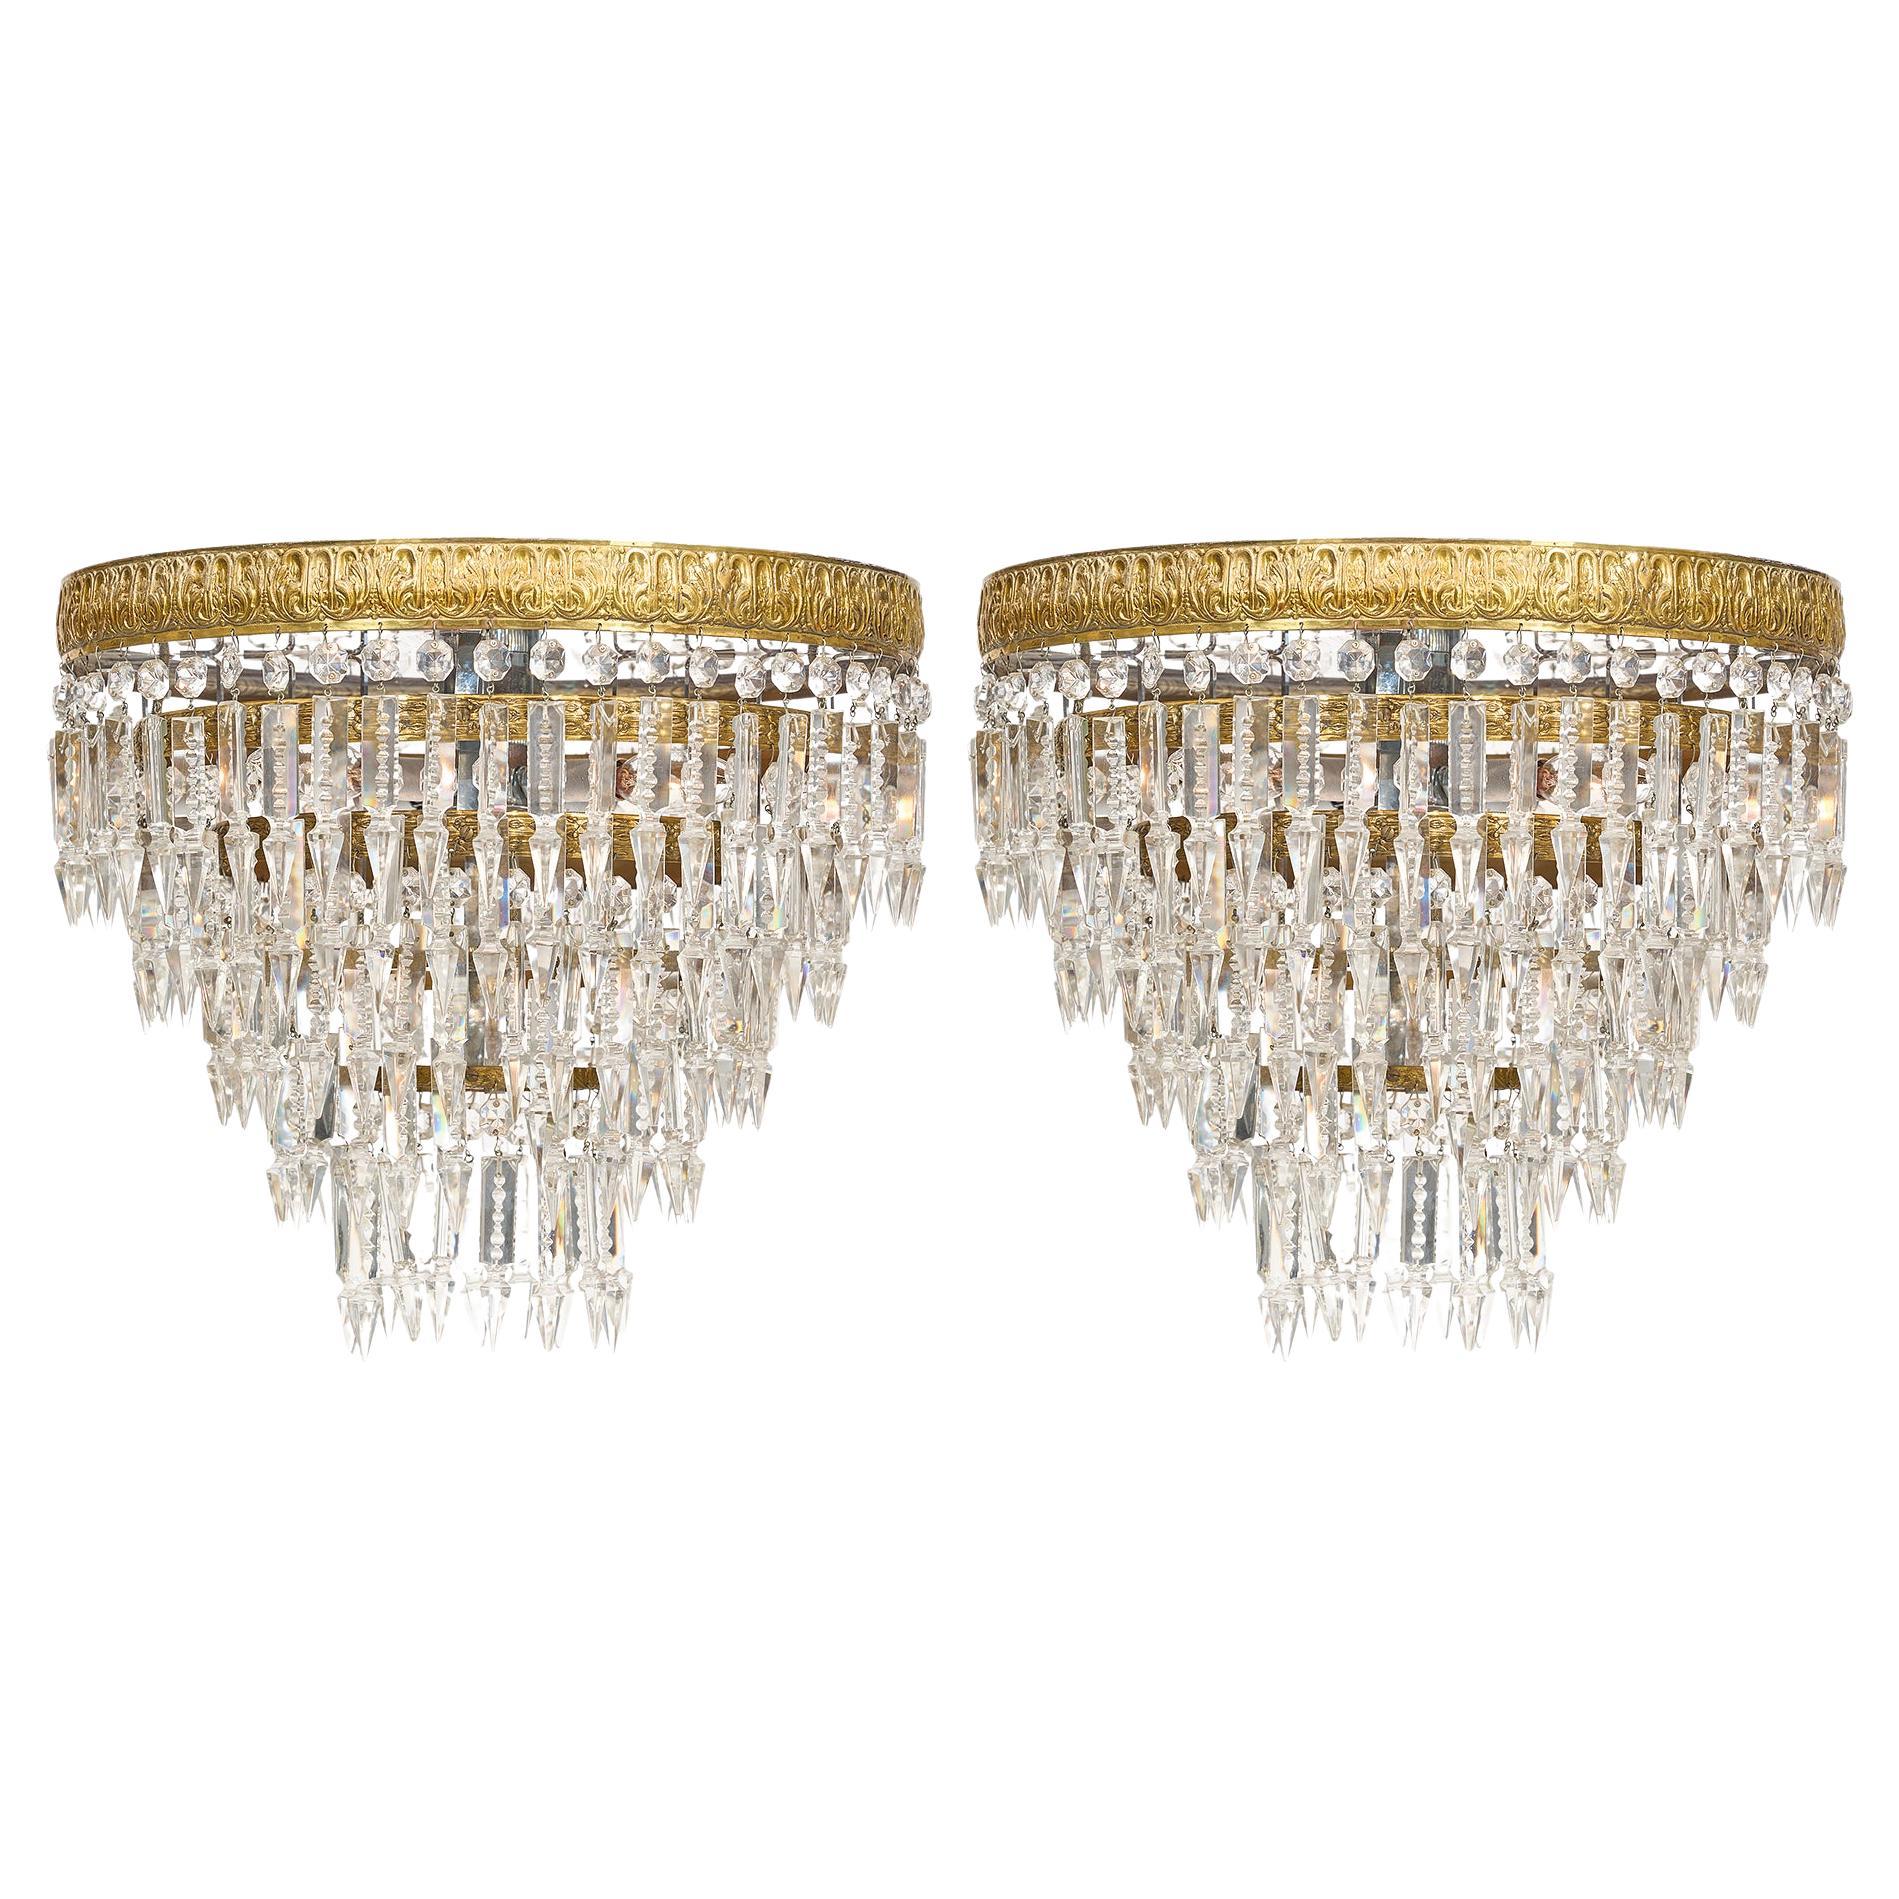 Baccarat Crystal Chandeliers For Sale